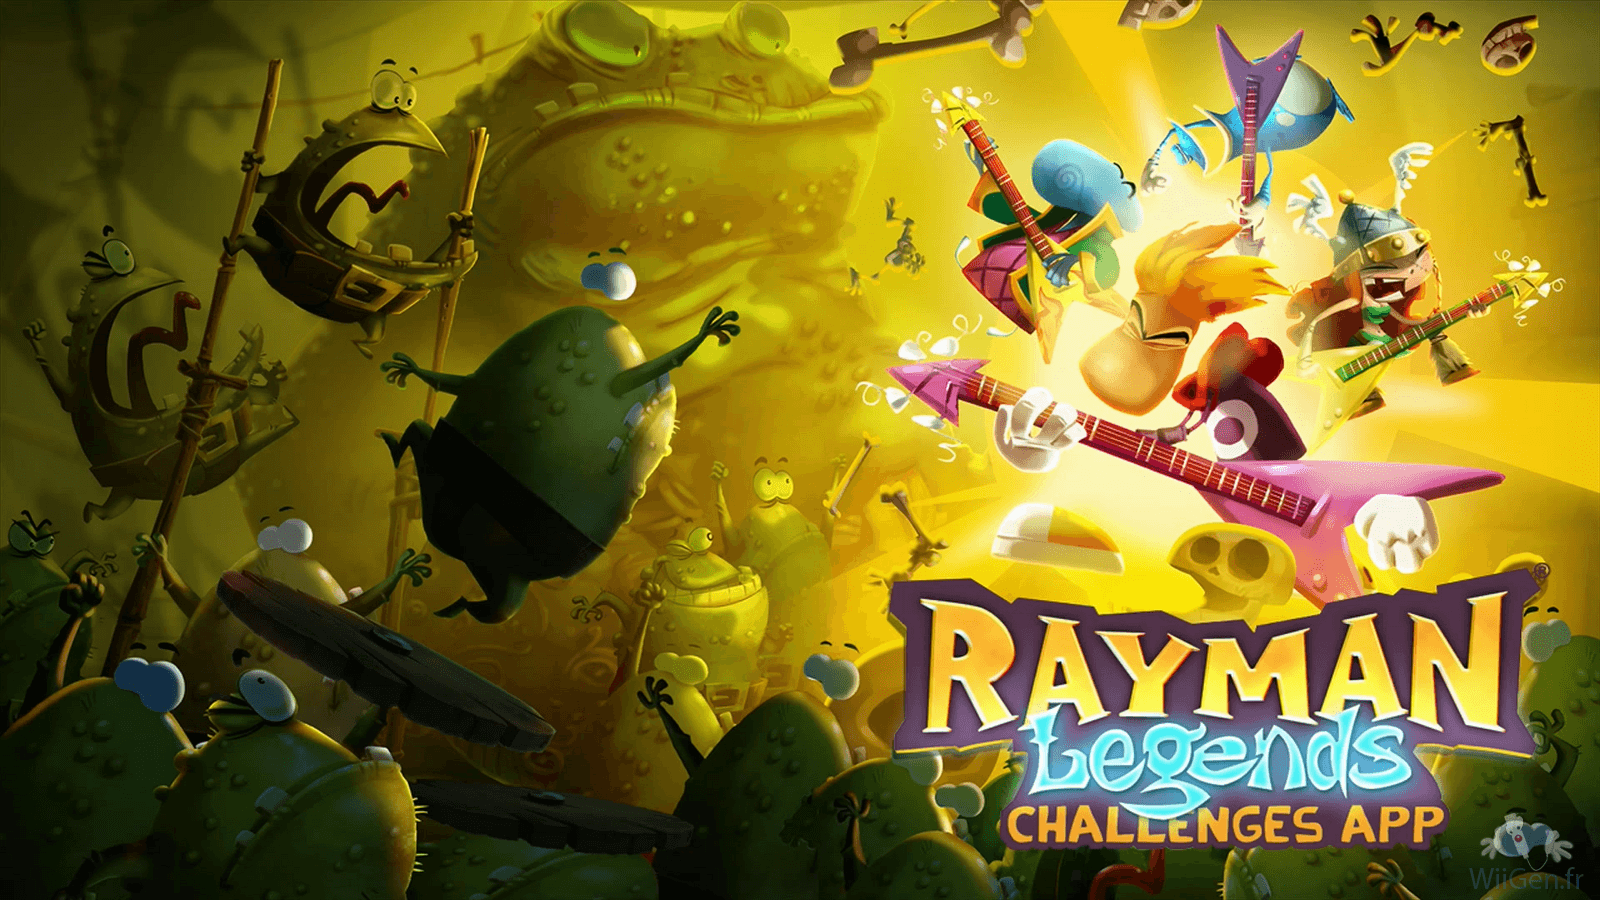 Rayman Legends HD Wallpapers and Backgrounds Image.